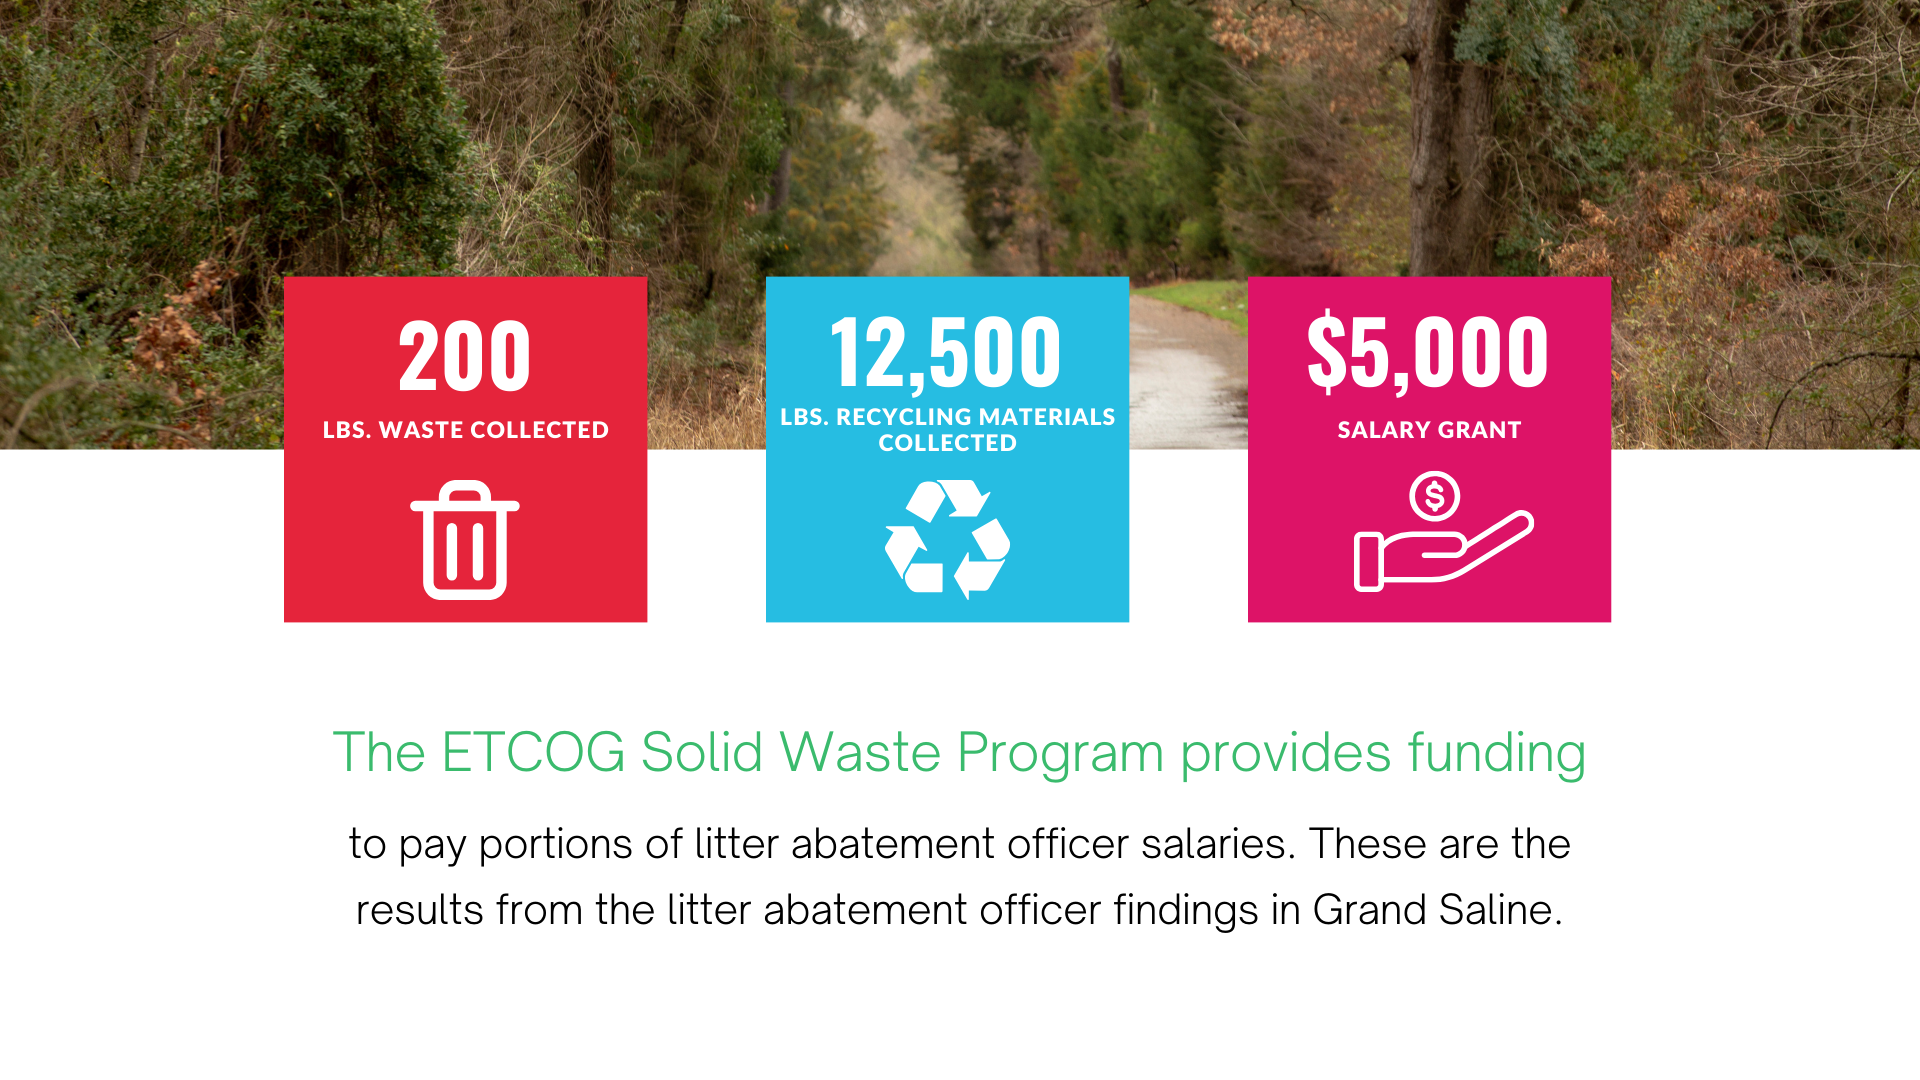 The waste program provides funding to pay portions of litter statement officer salaries.